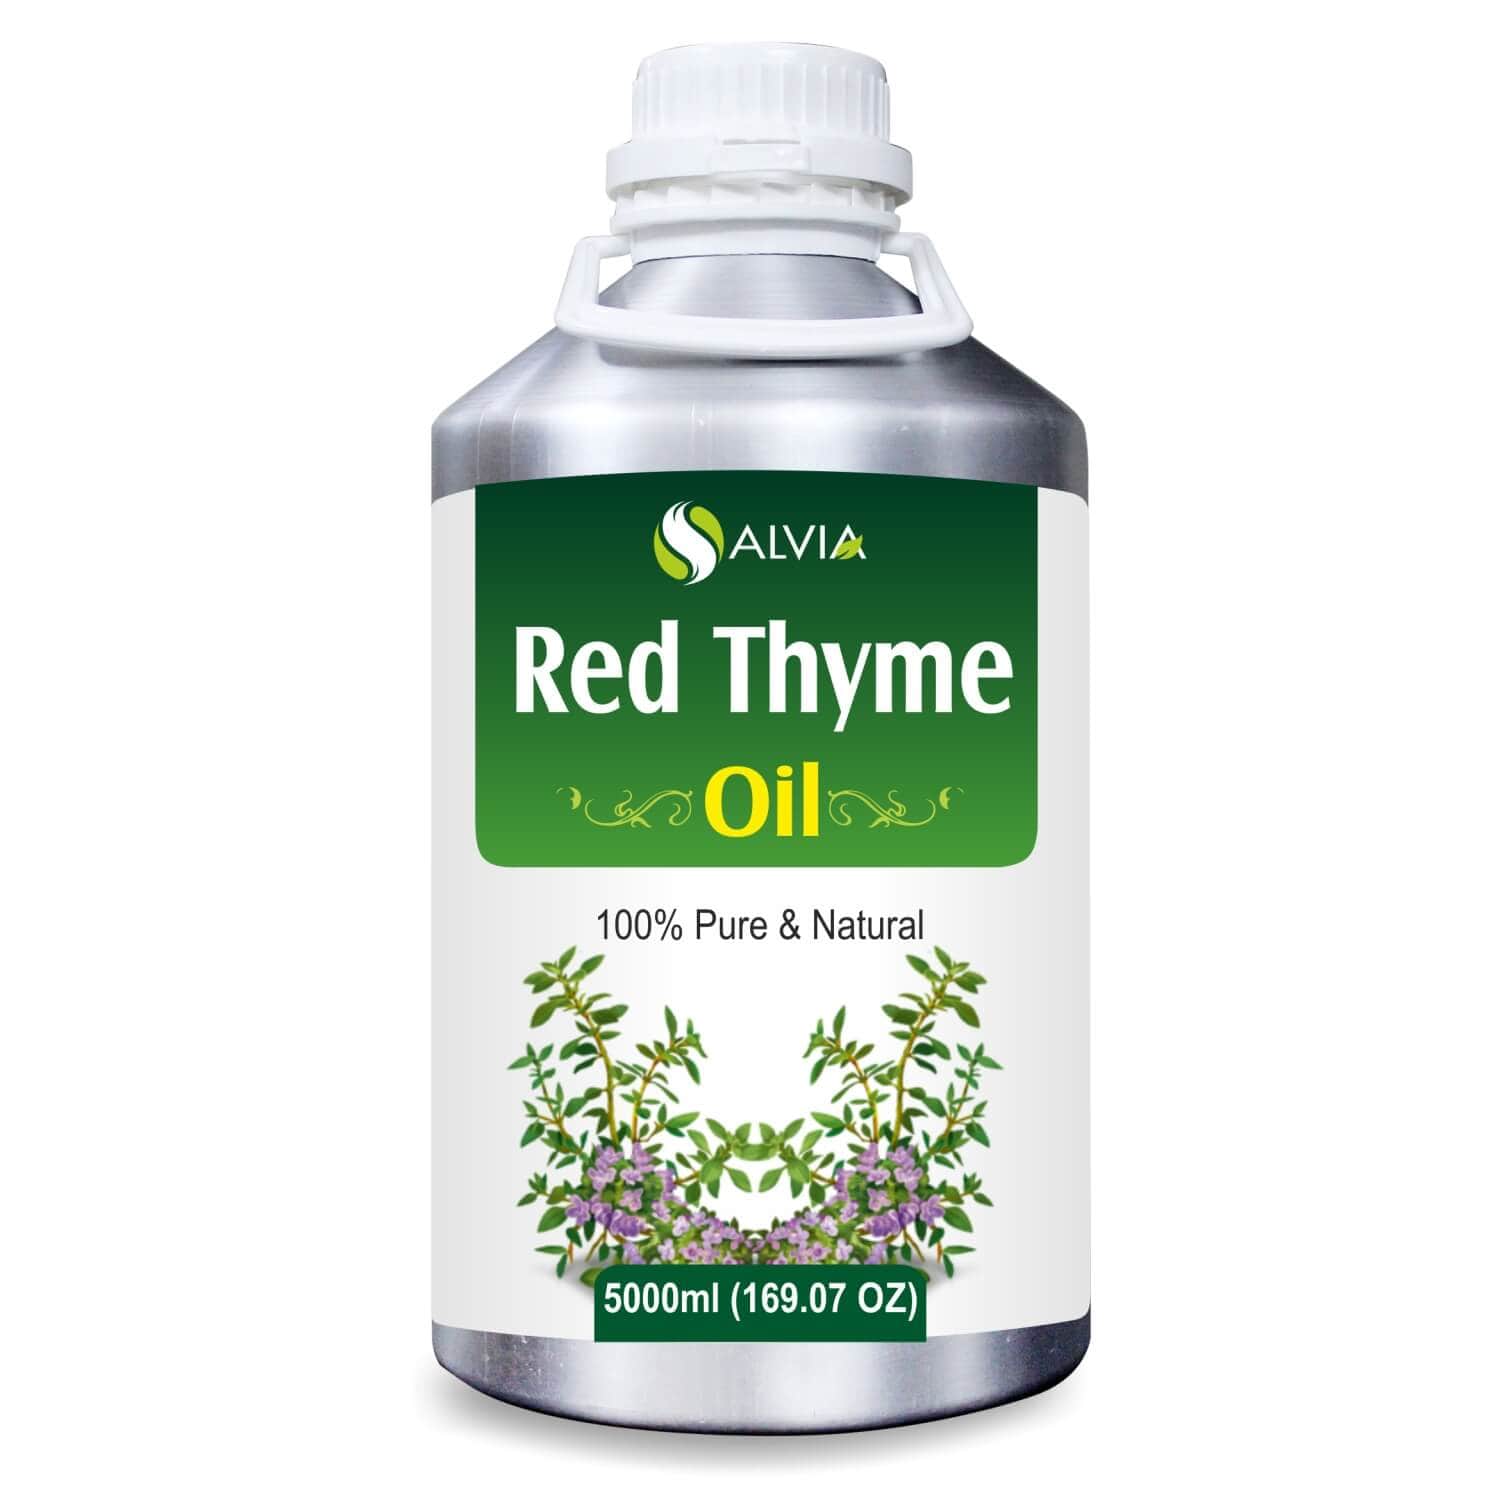 Salvia Natural Essential Oils 5000ml Red Thyme (Thymus Vulgaris) Pure & Undiluted Essential Oil